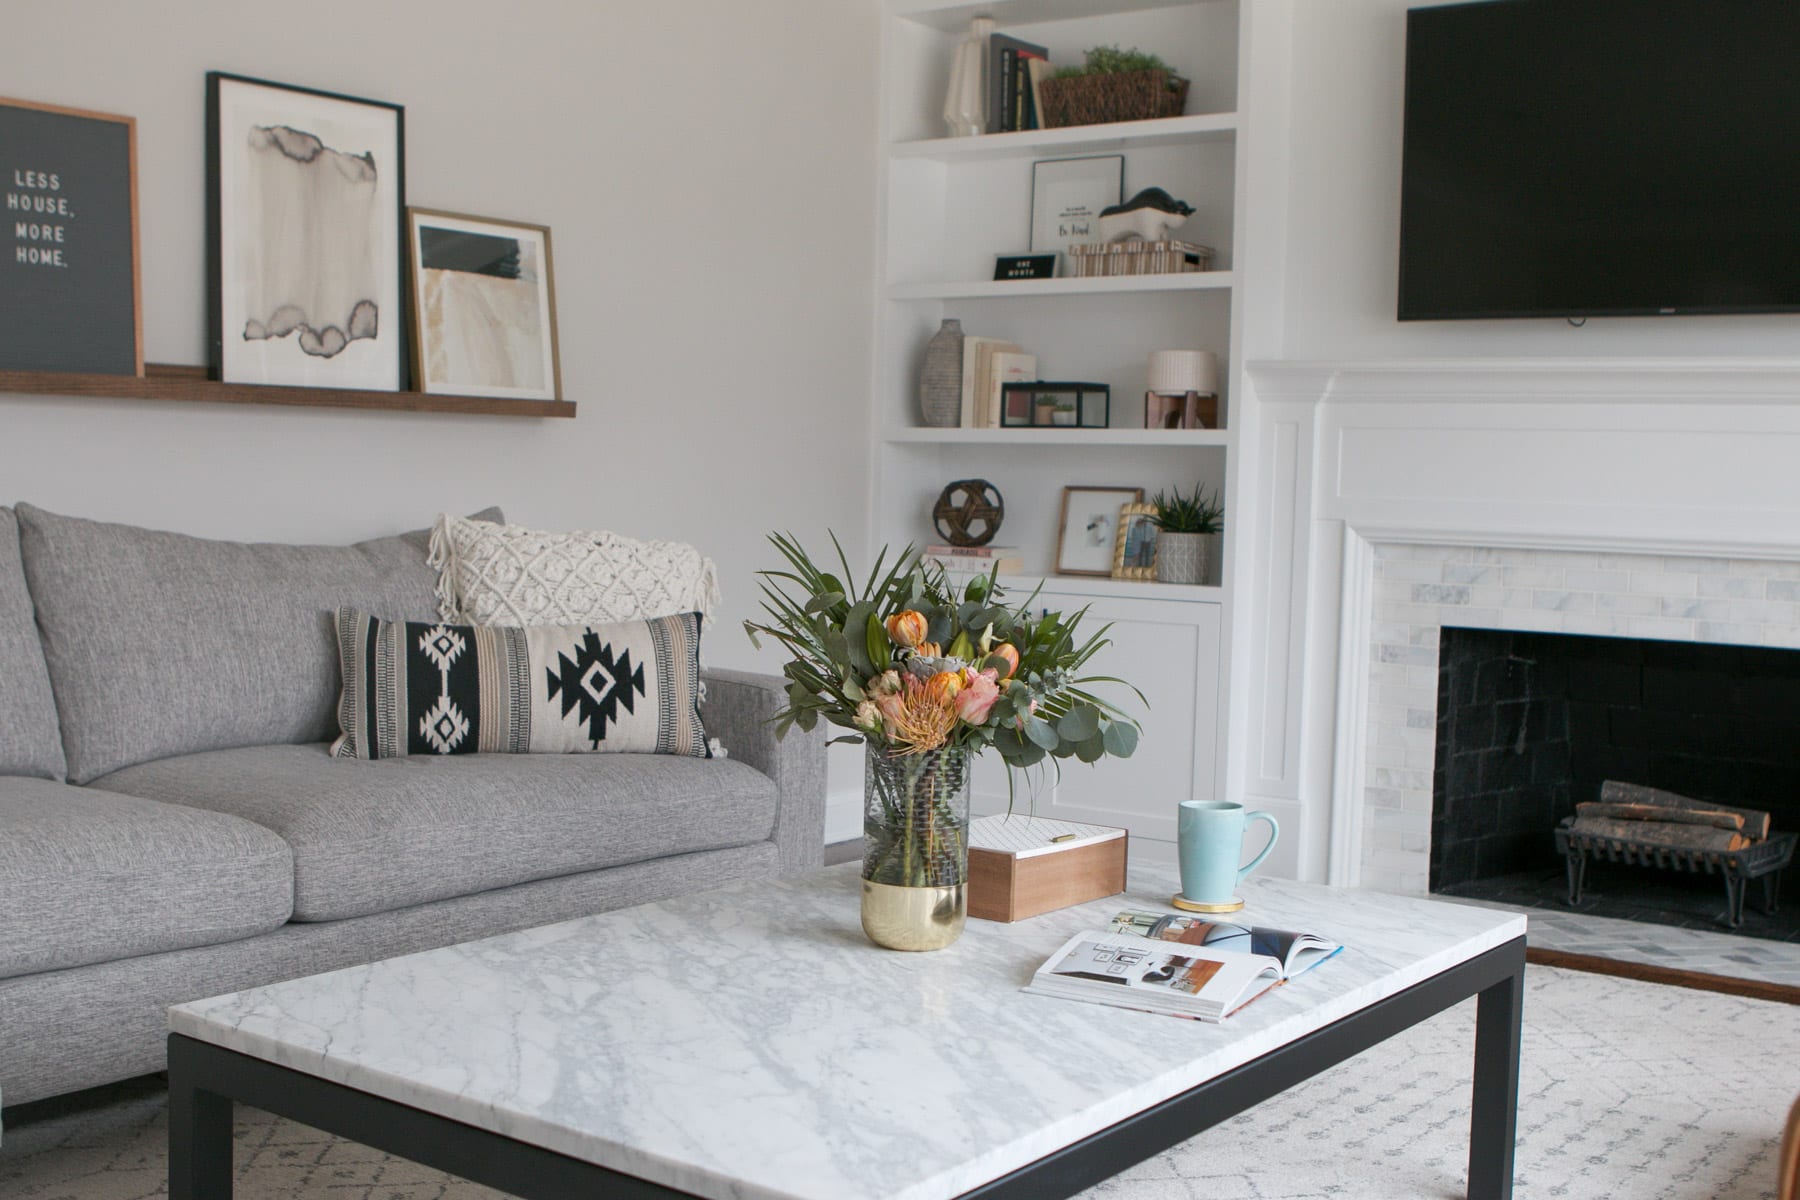 Marble coffee table from Crate + Barrel